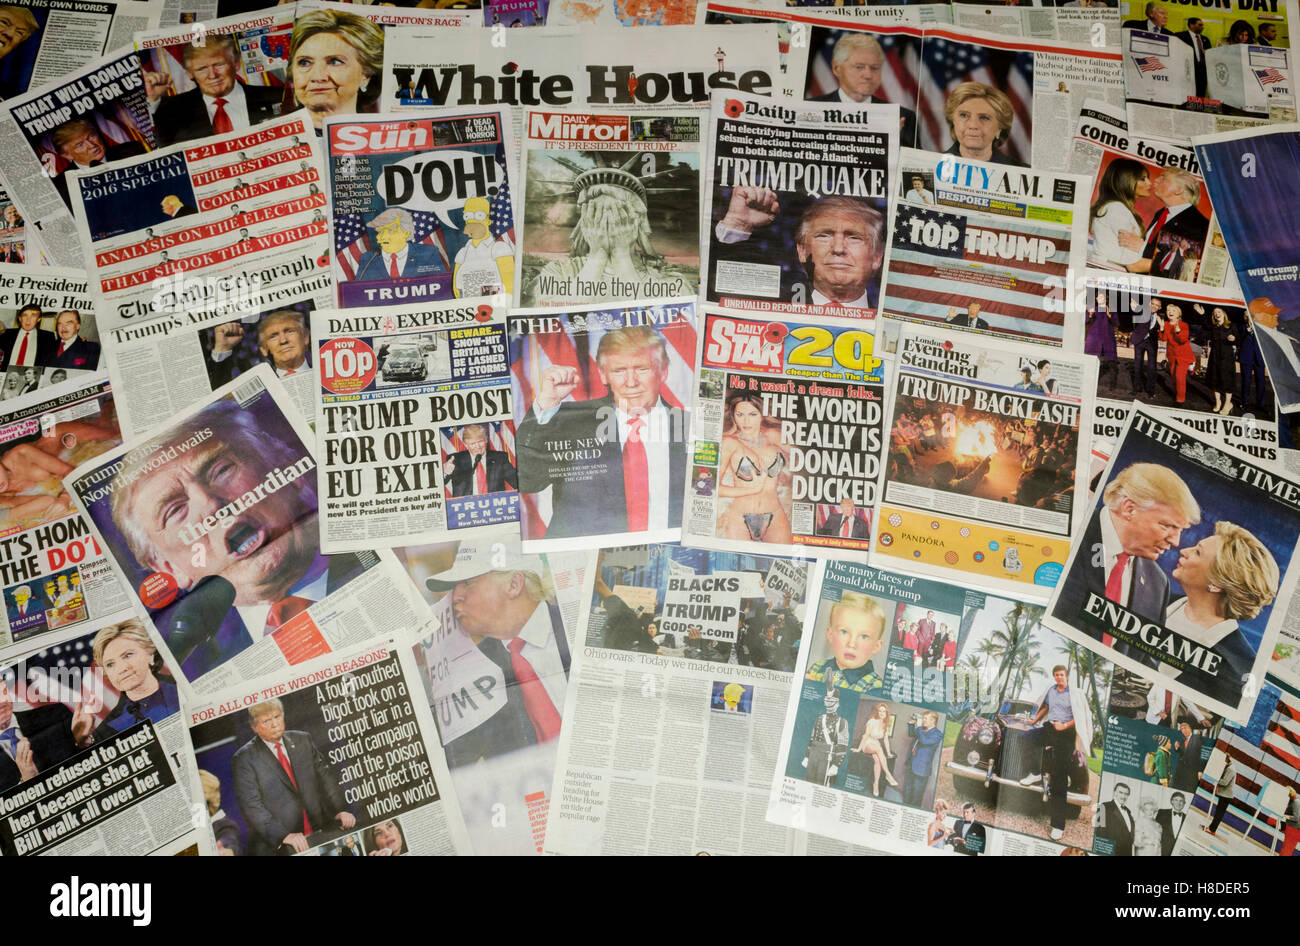 British newspaper front pages reporting on the US presidential election result in which Donald Trump became the 45th President of the United States. Stock Photo